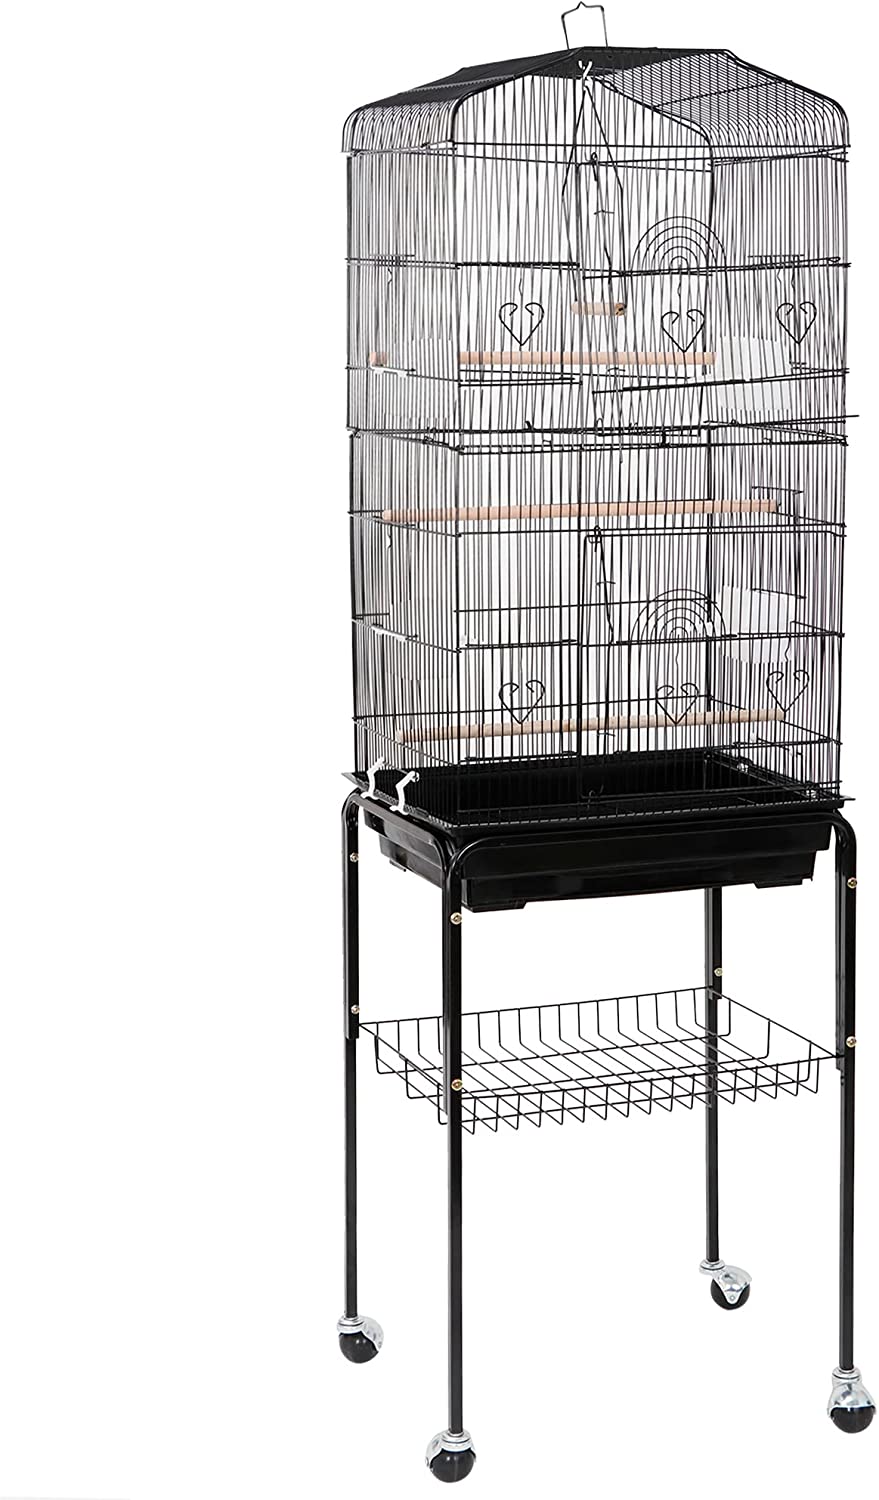 59.3 Inch Bird Cage, Rolling Wrought Iron Parrot Cage with Side-Out Tray, Storage Shelf, Pet Bird House for Parrot Cockatiel Cockatoo Parakeet Macaw Finches